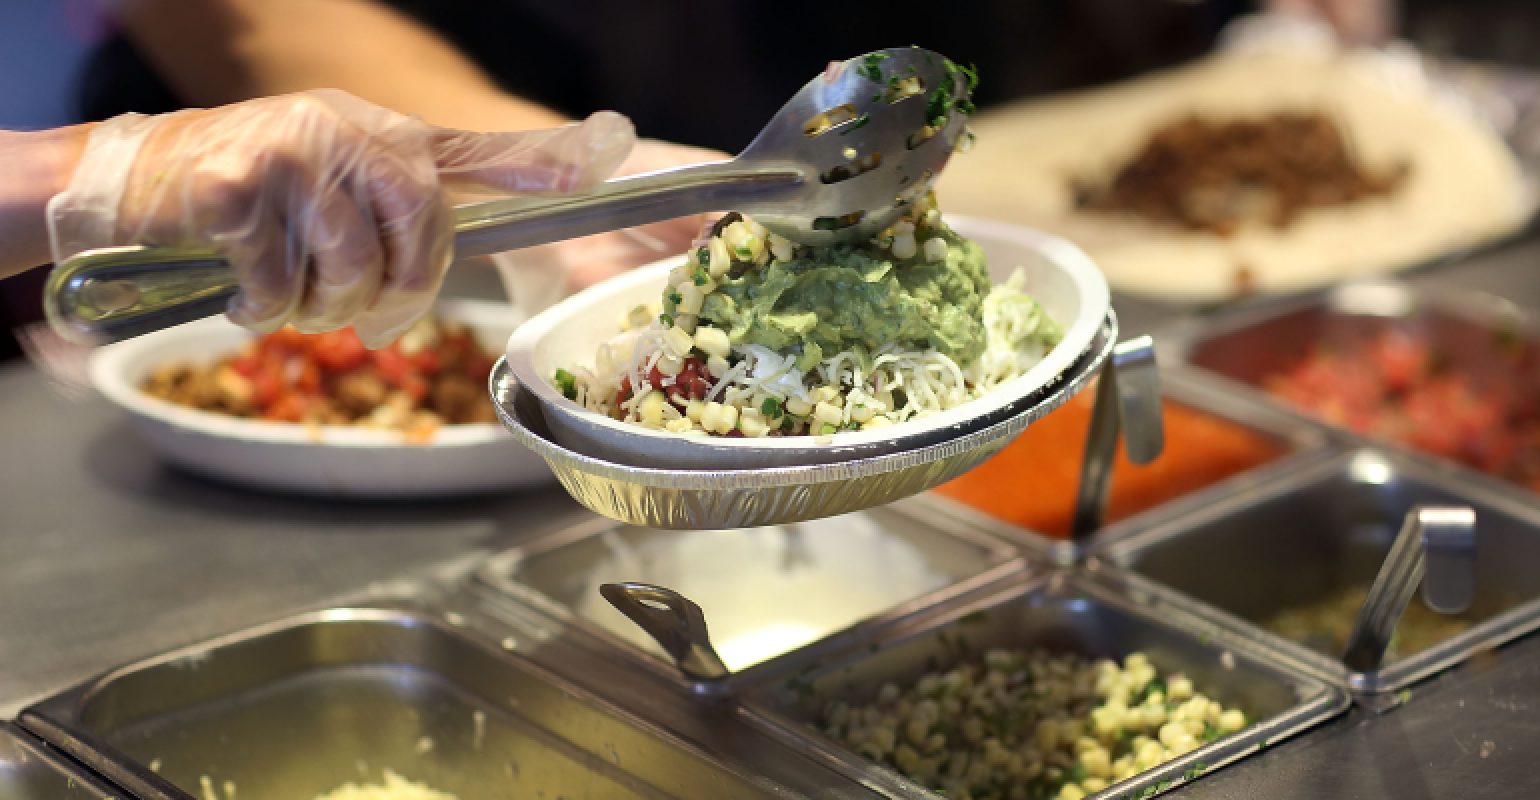 Chipotle Sustainability Recycle Plastic Gloves Getty Promo 4 ?itok=pDveN5aP